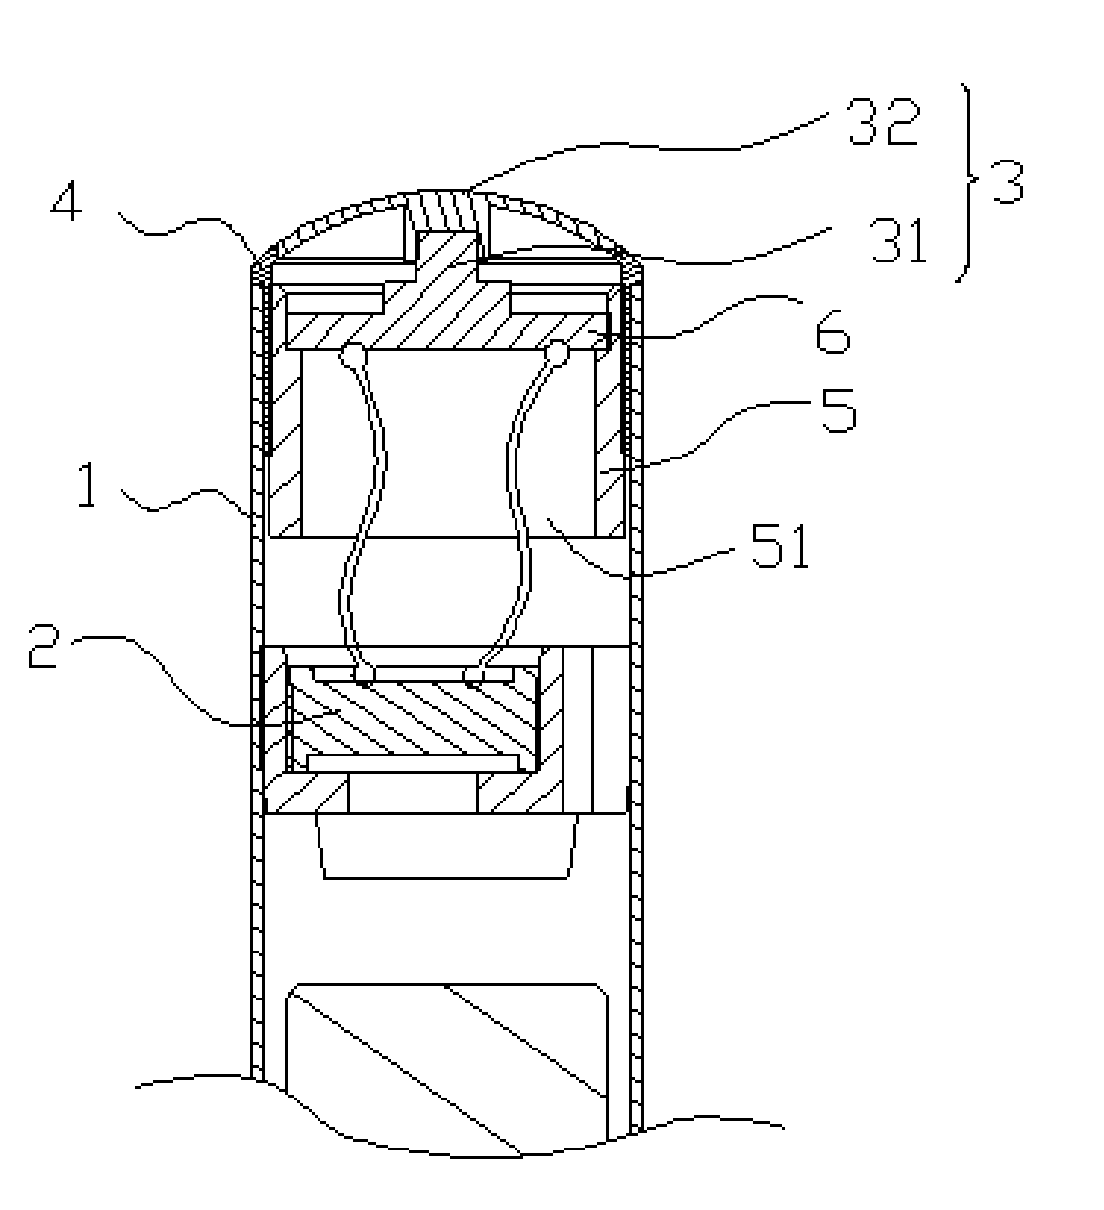 Electronic cigarette and method for electronic cigarette extinguishment